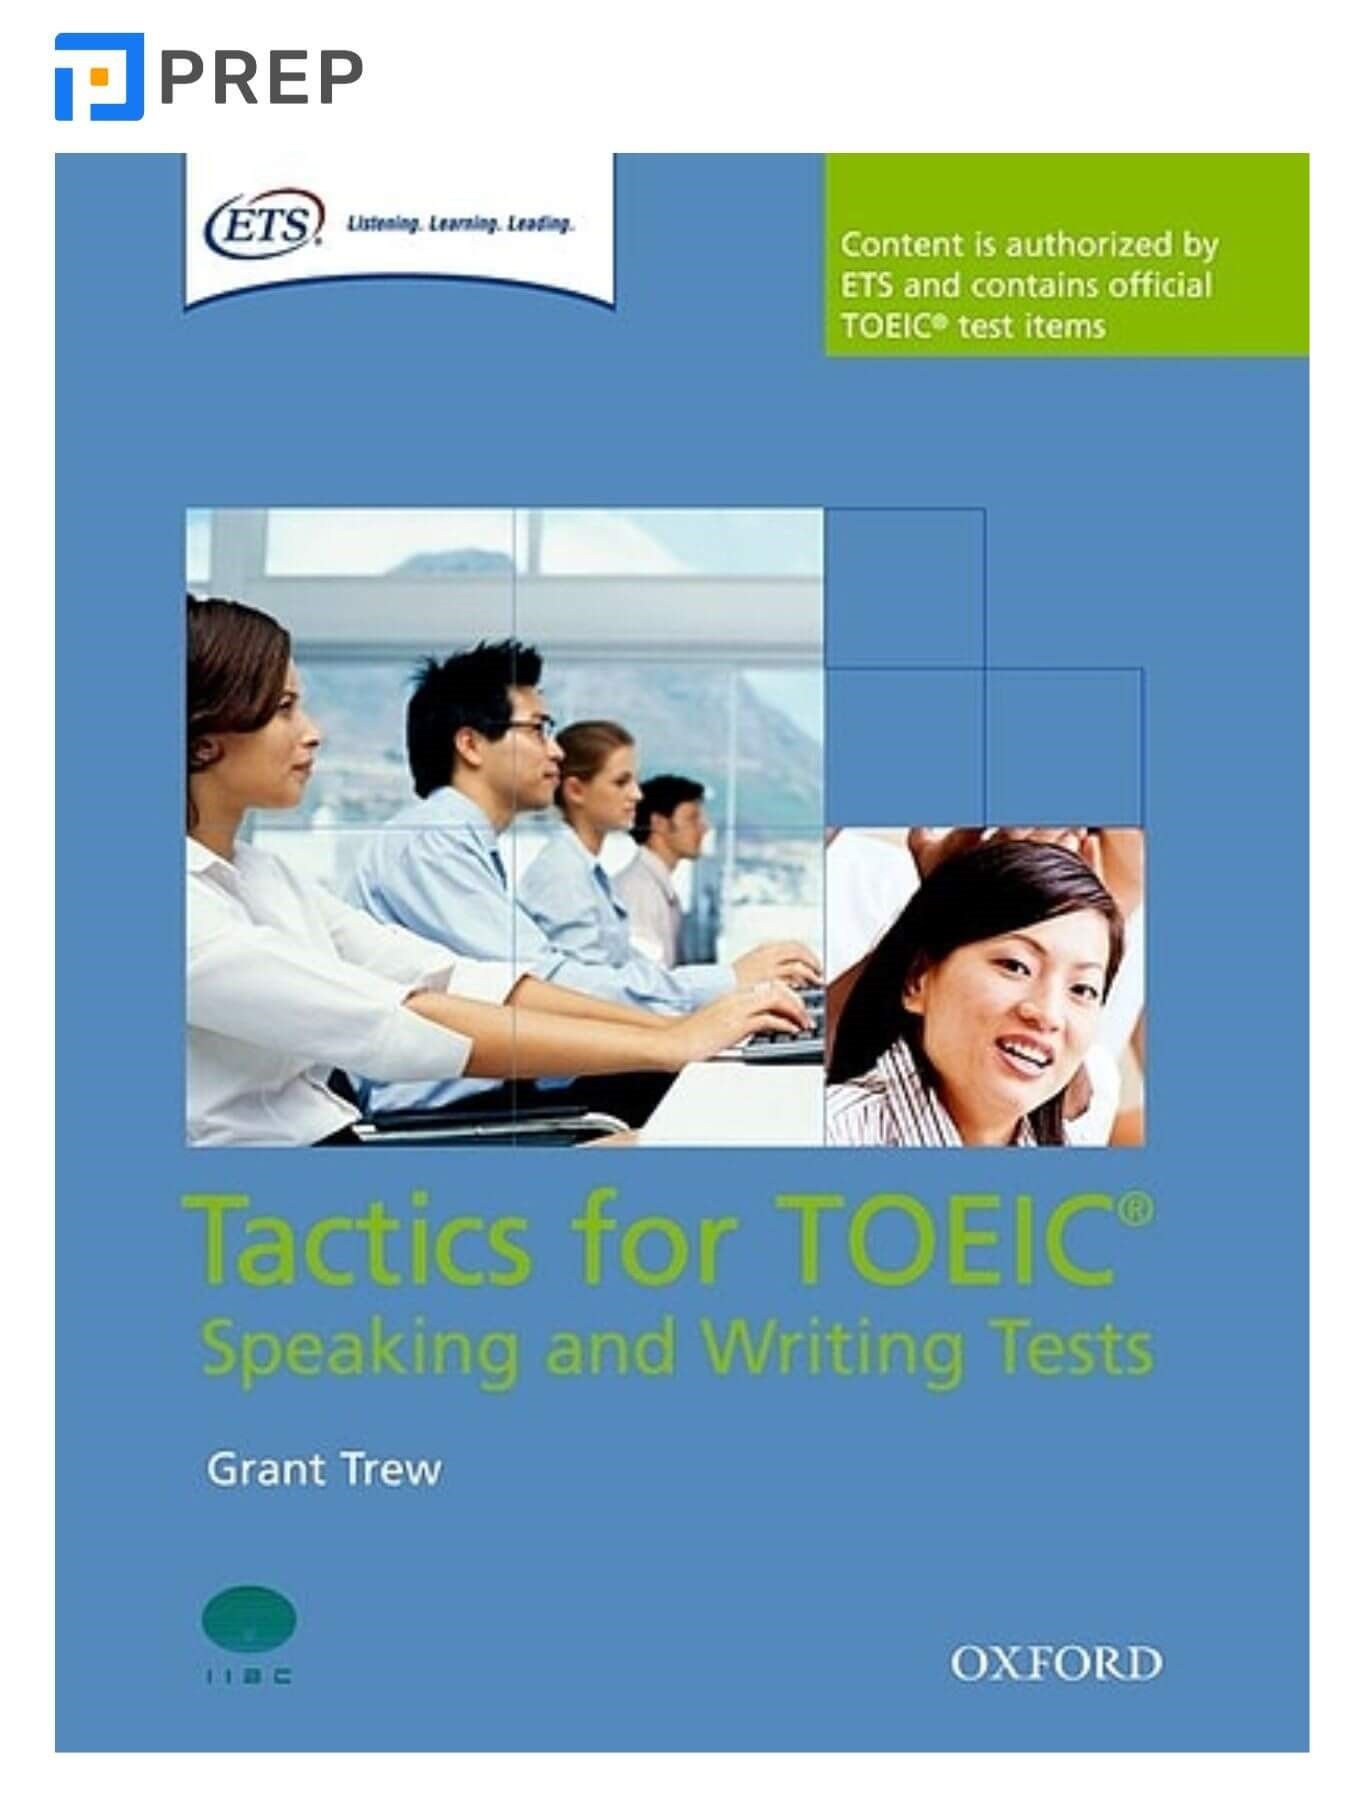 Developing Skills for the New TOEIC Test